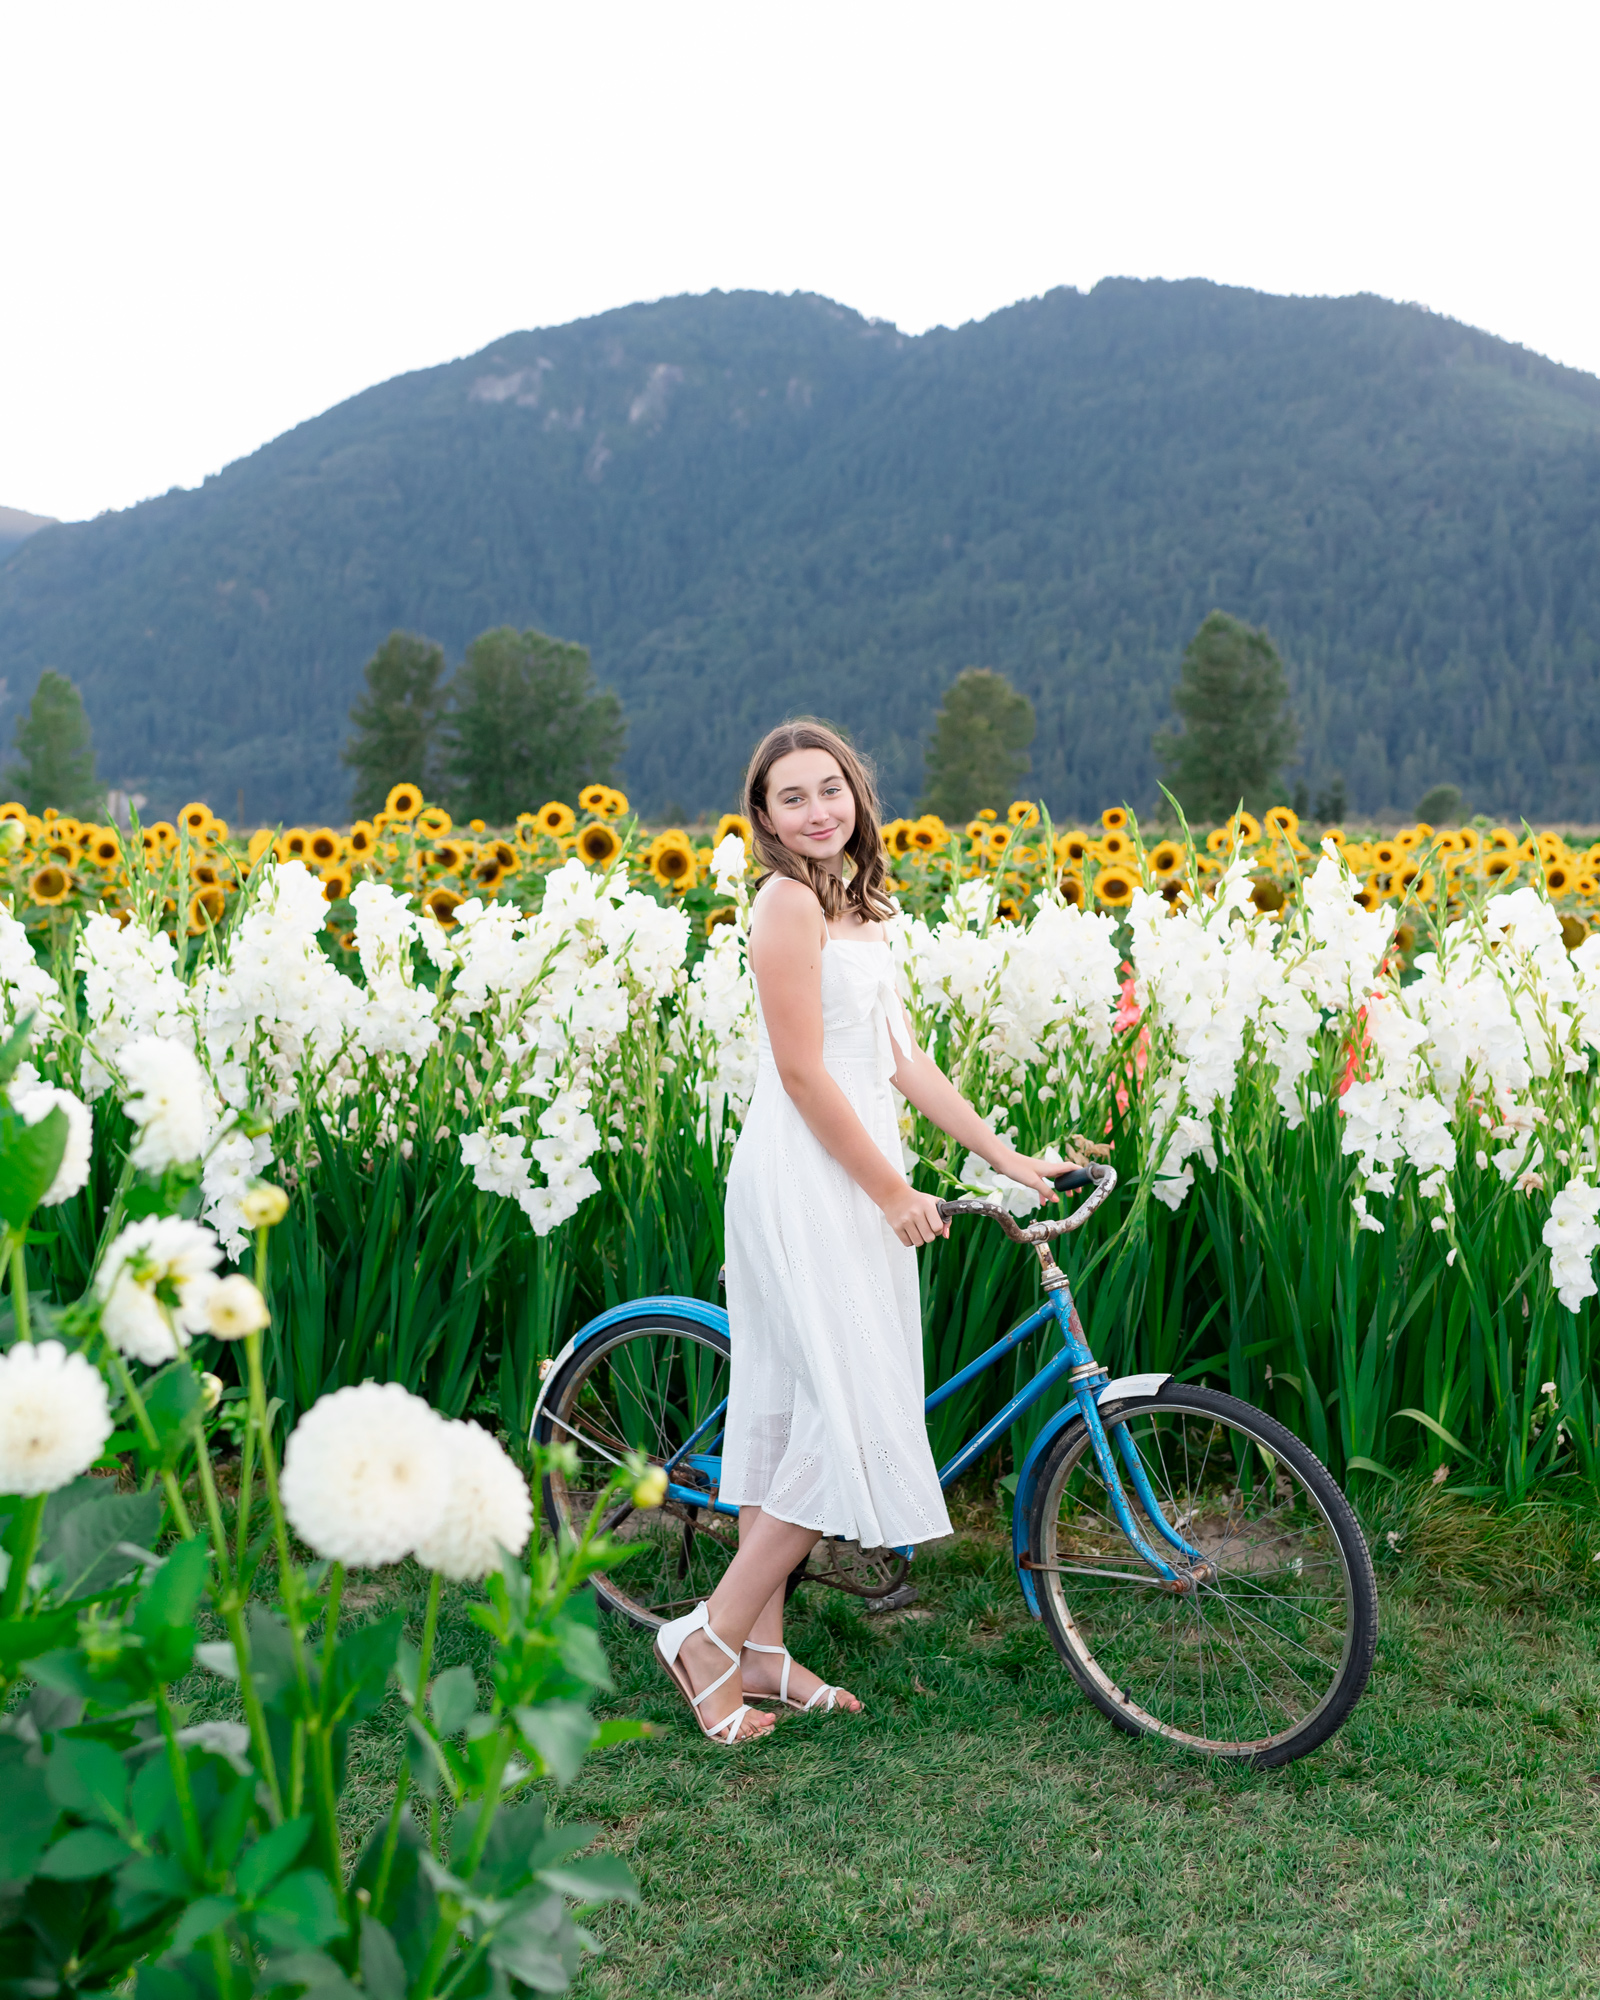 Teen with vintage bicycle in a flower field